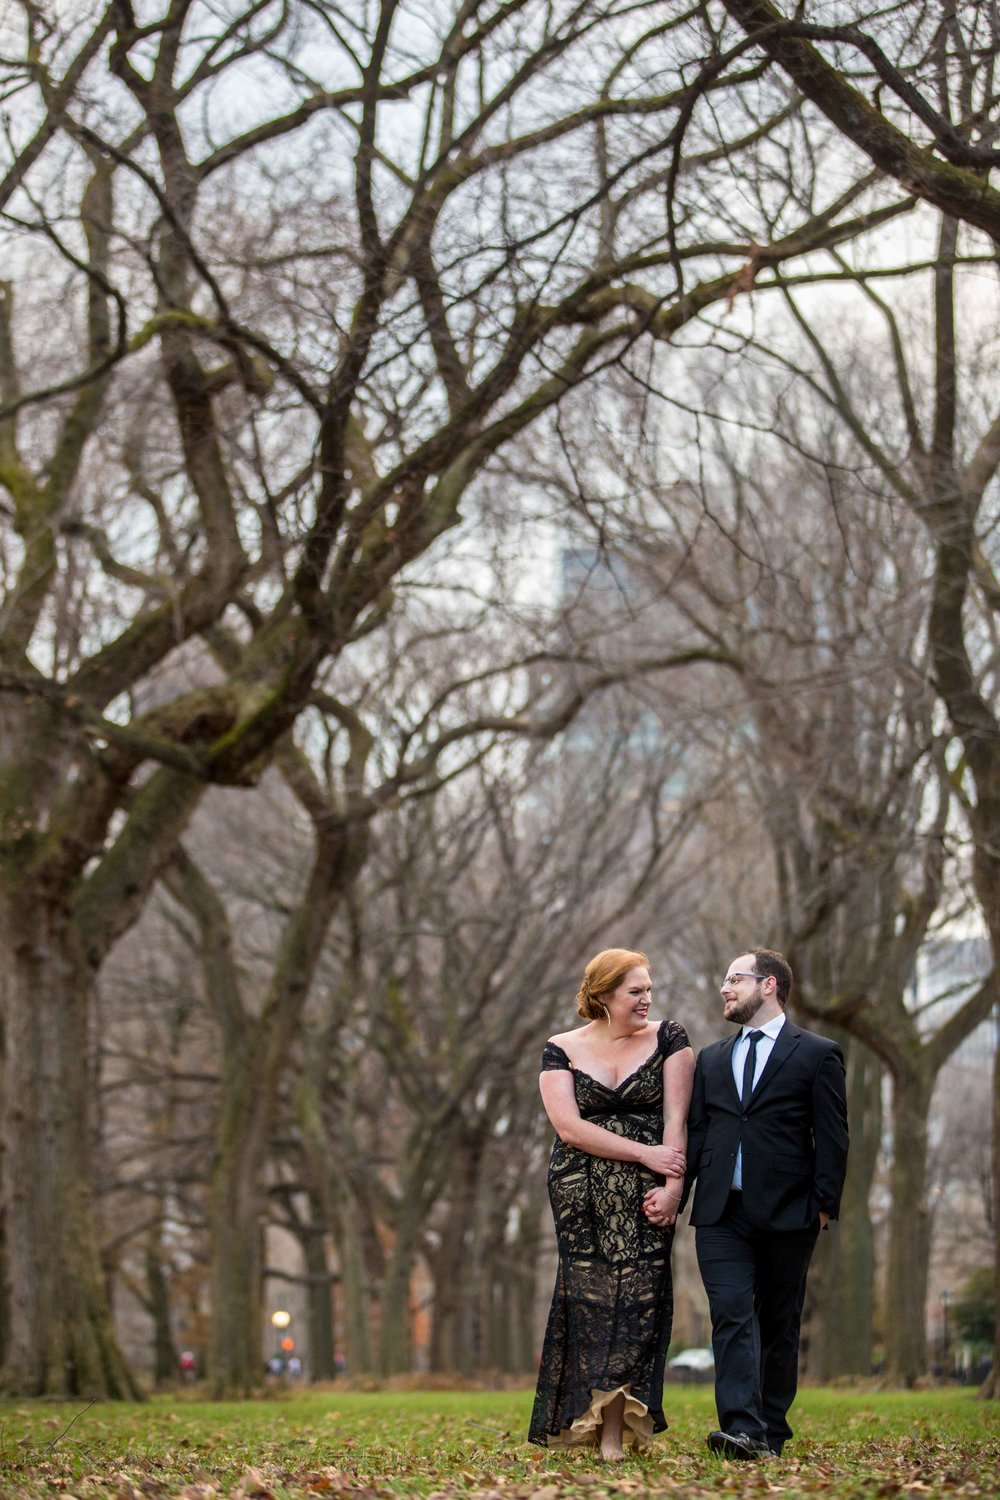 Central Park Engagement Session Photography Shoot NYC Wedding Photographer Photos